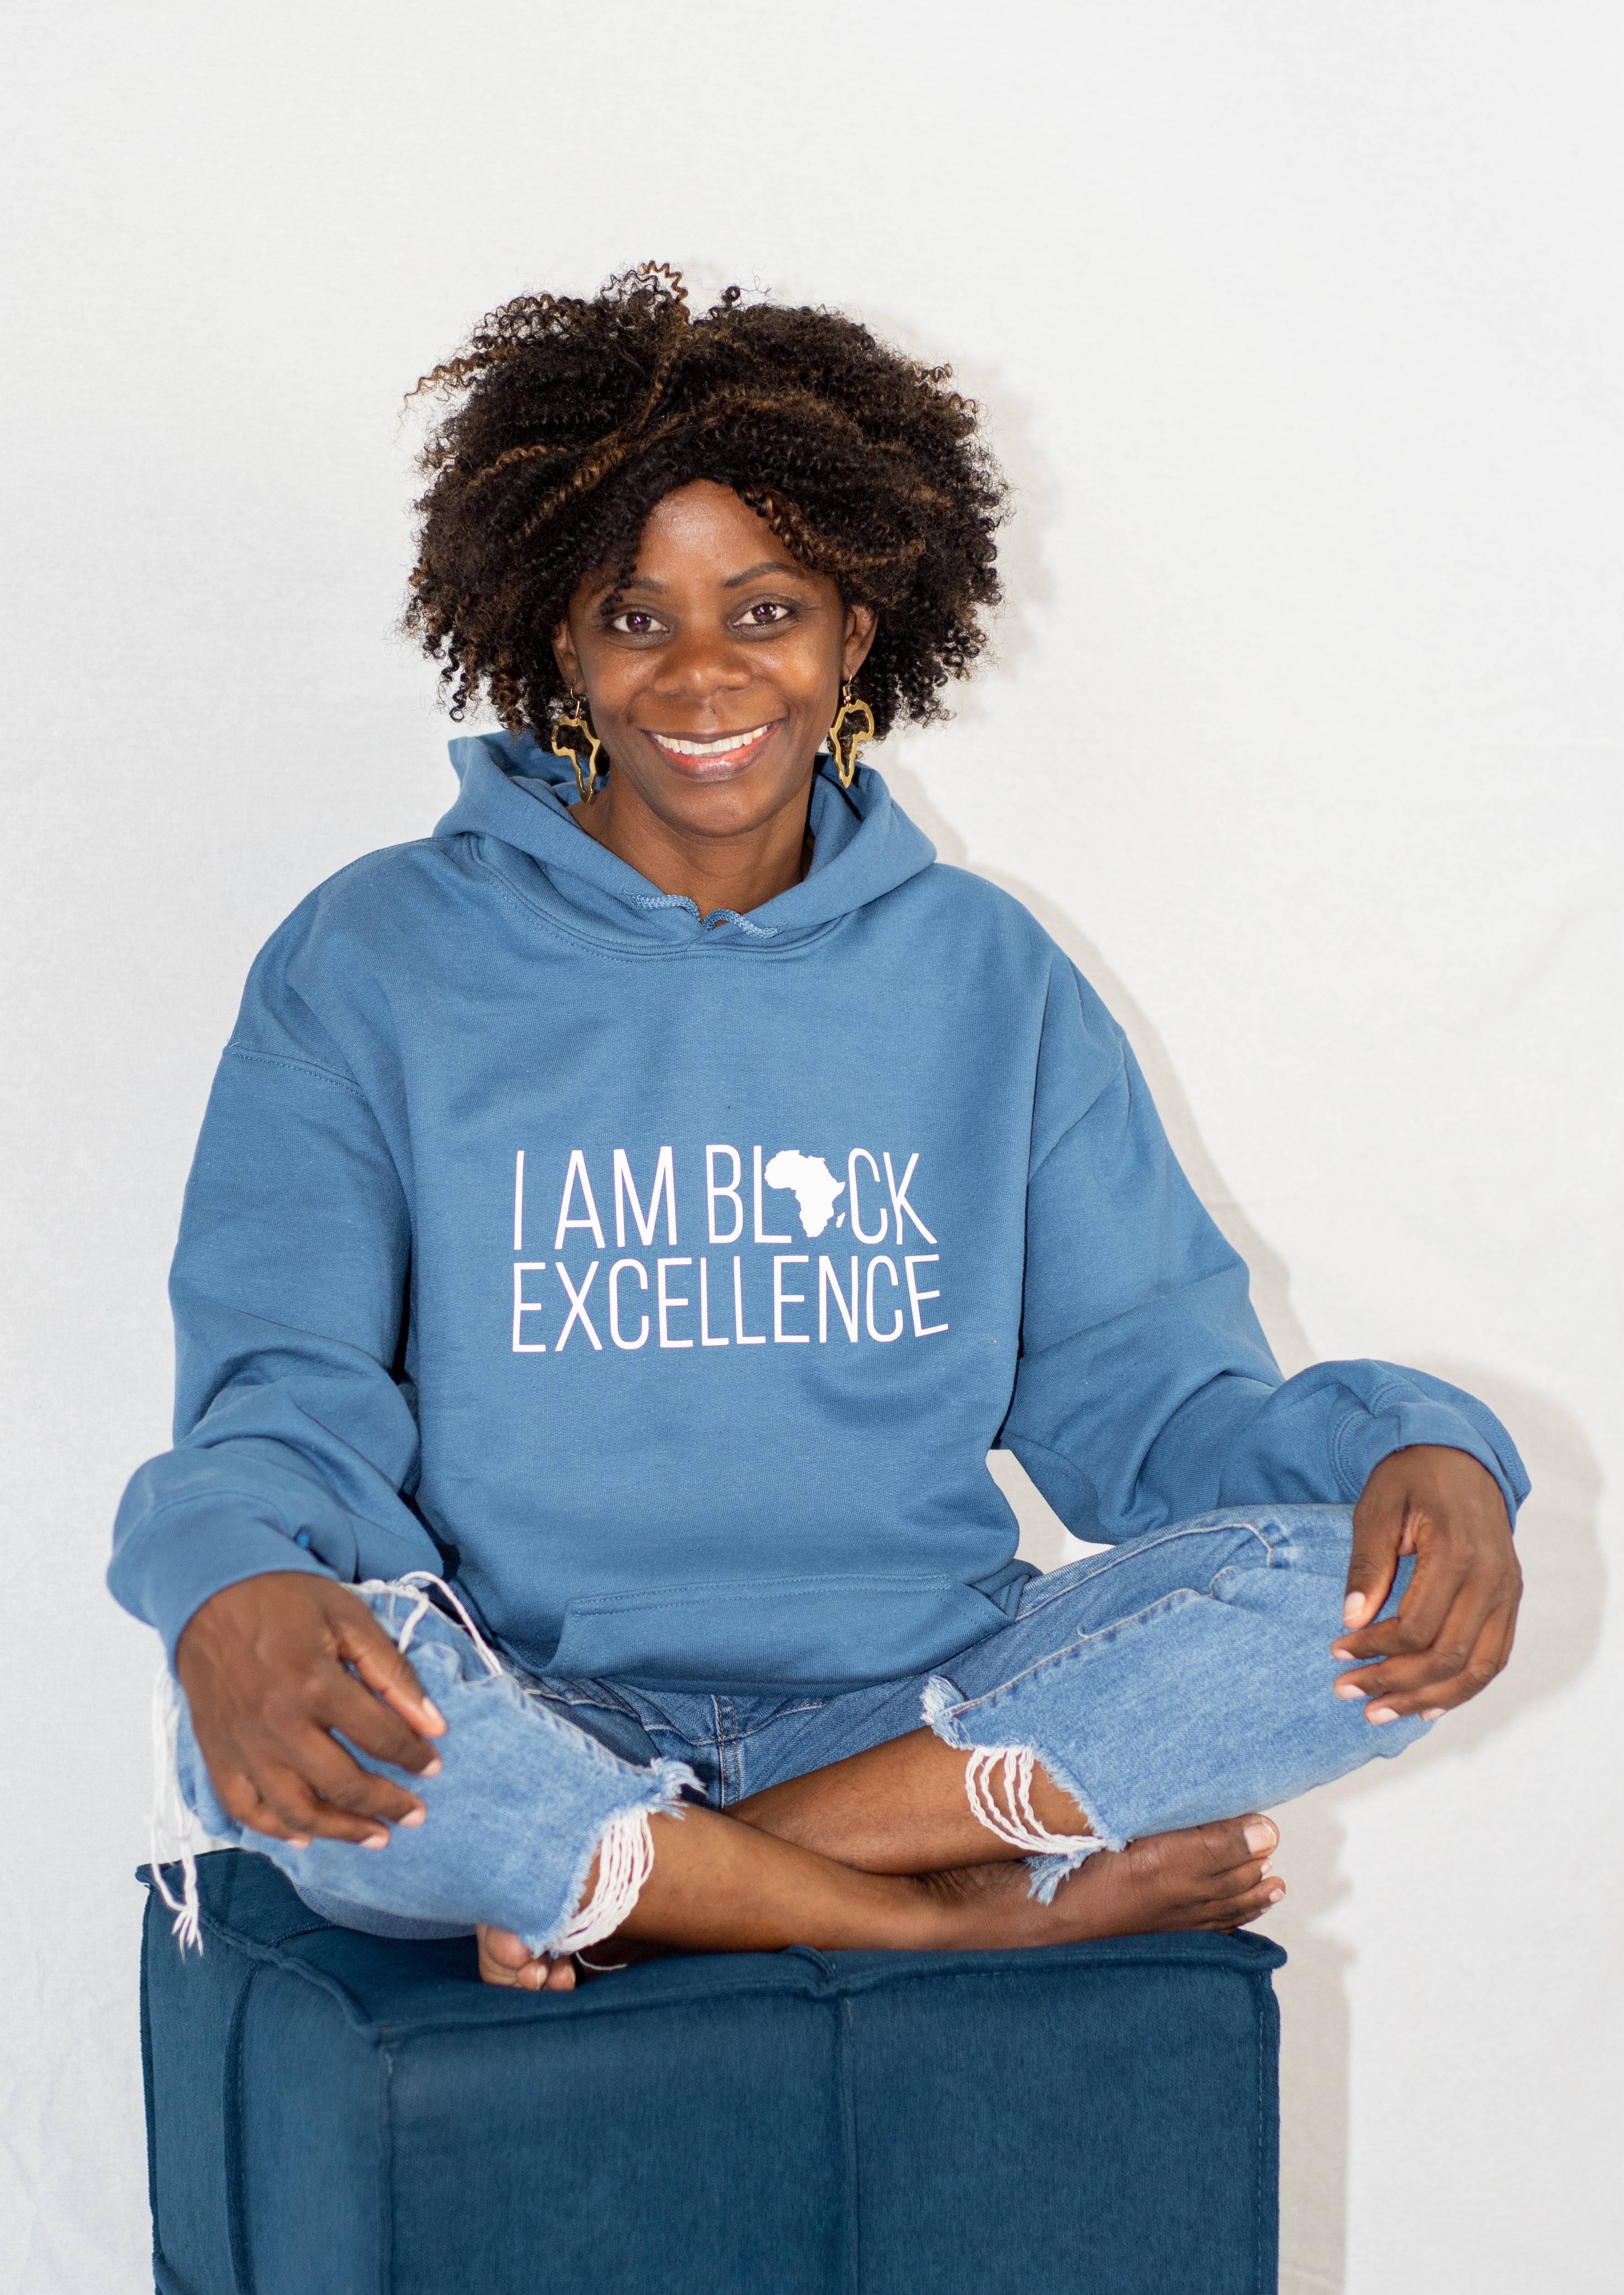 I Am Black Excellence Hoodie